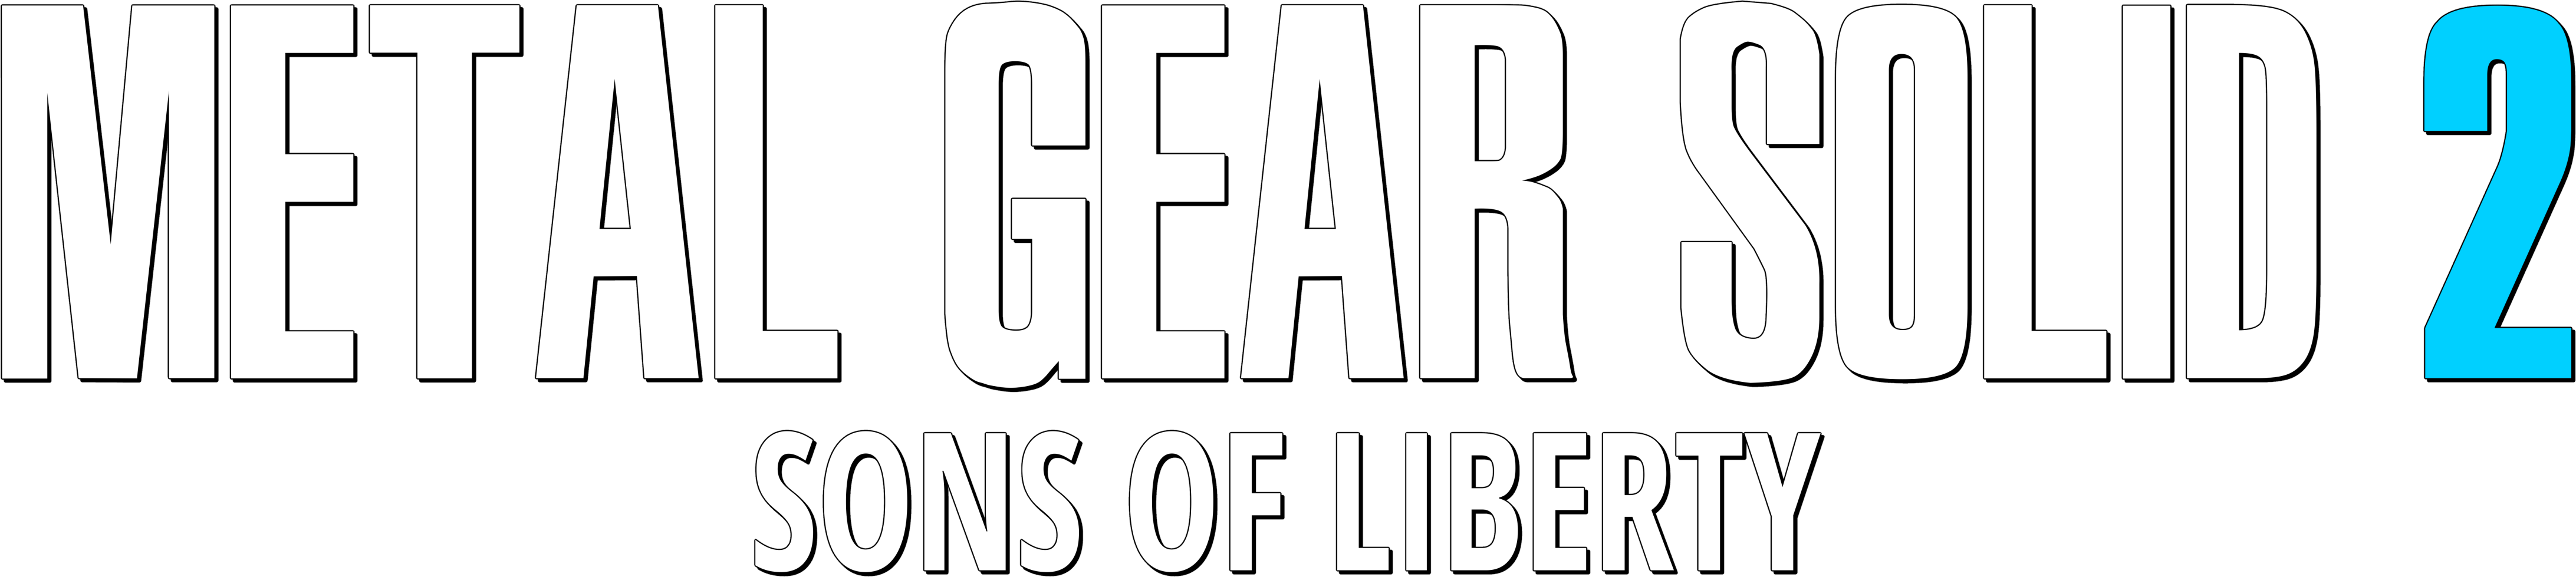 Metal Gear Solid 2 Sons Of Liberty Logo PNG Images HD